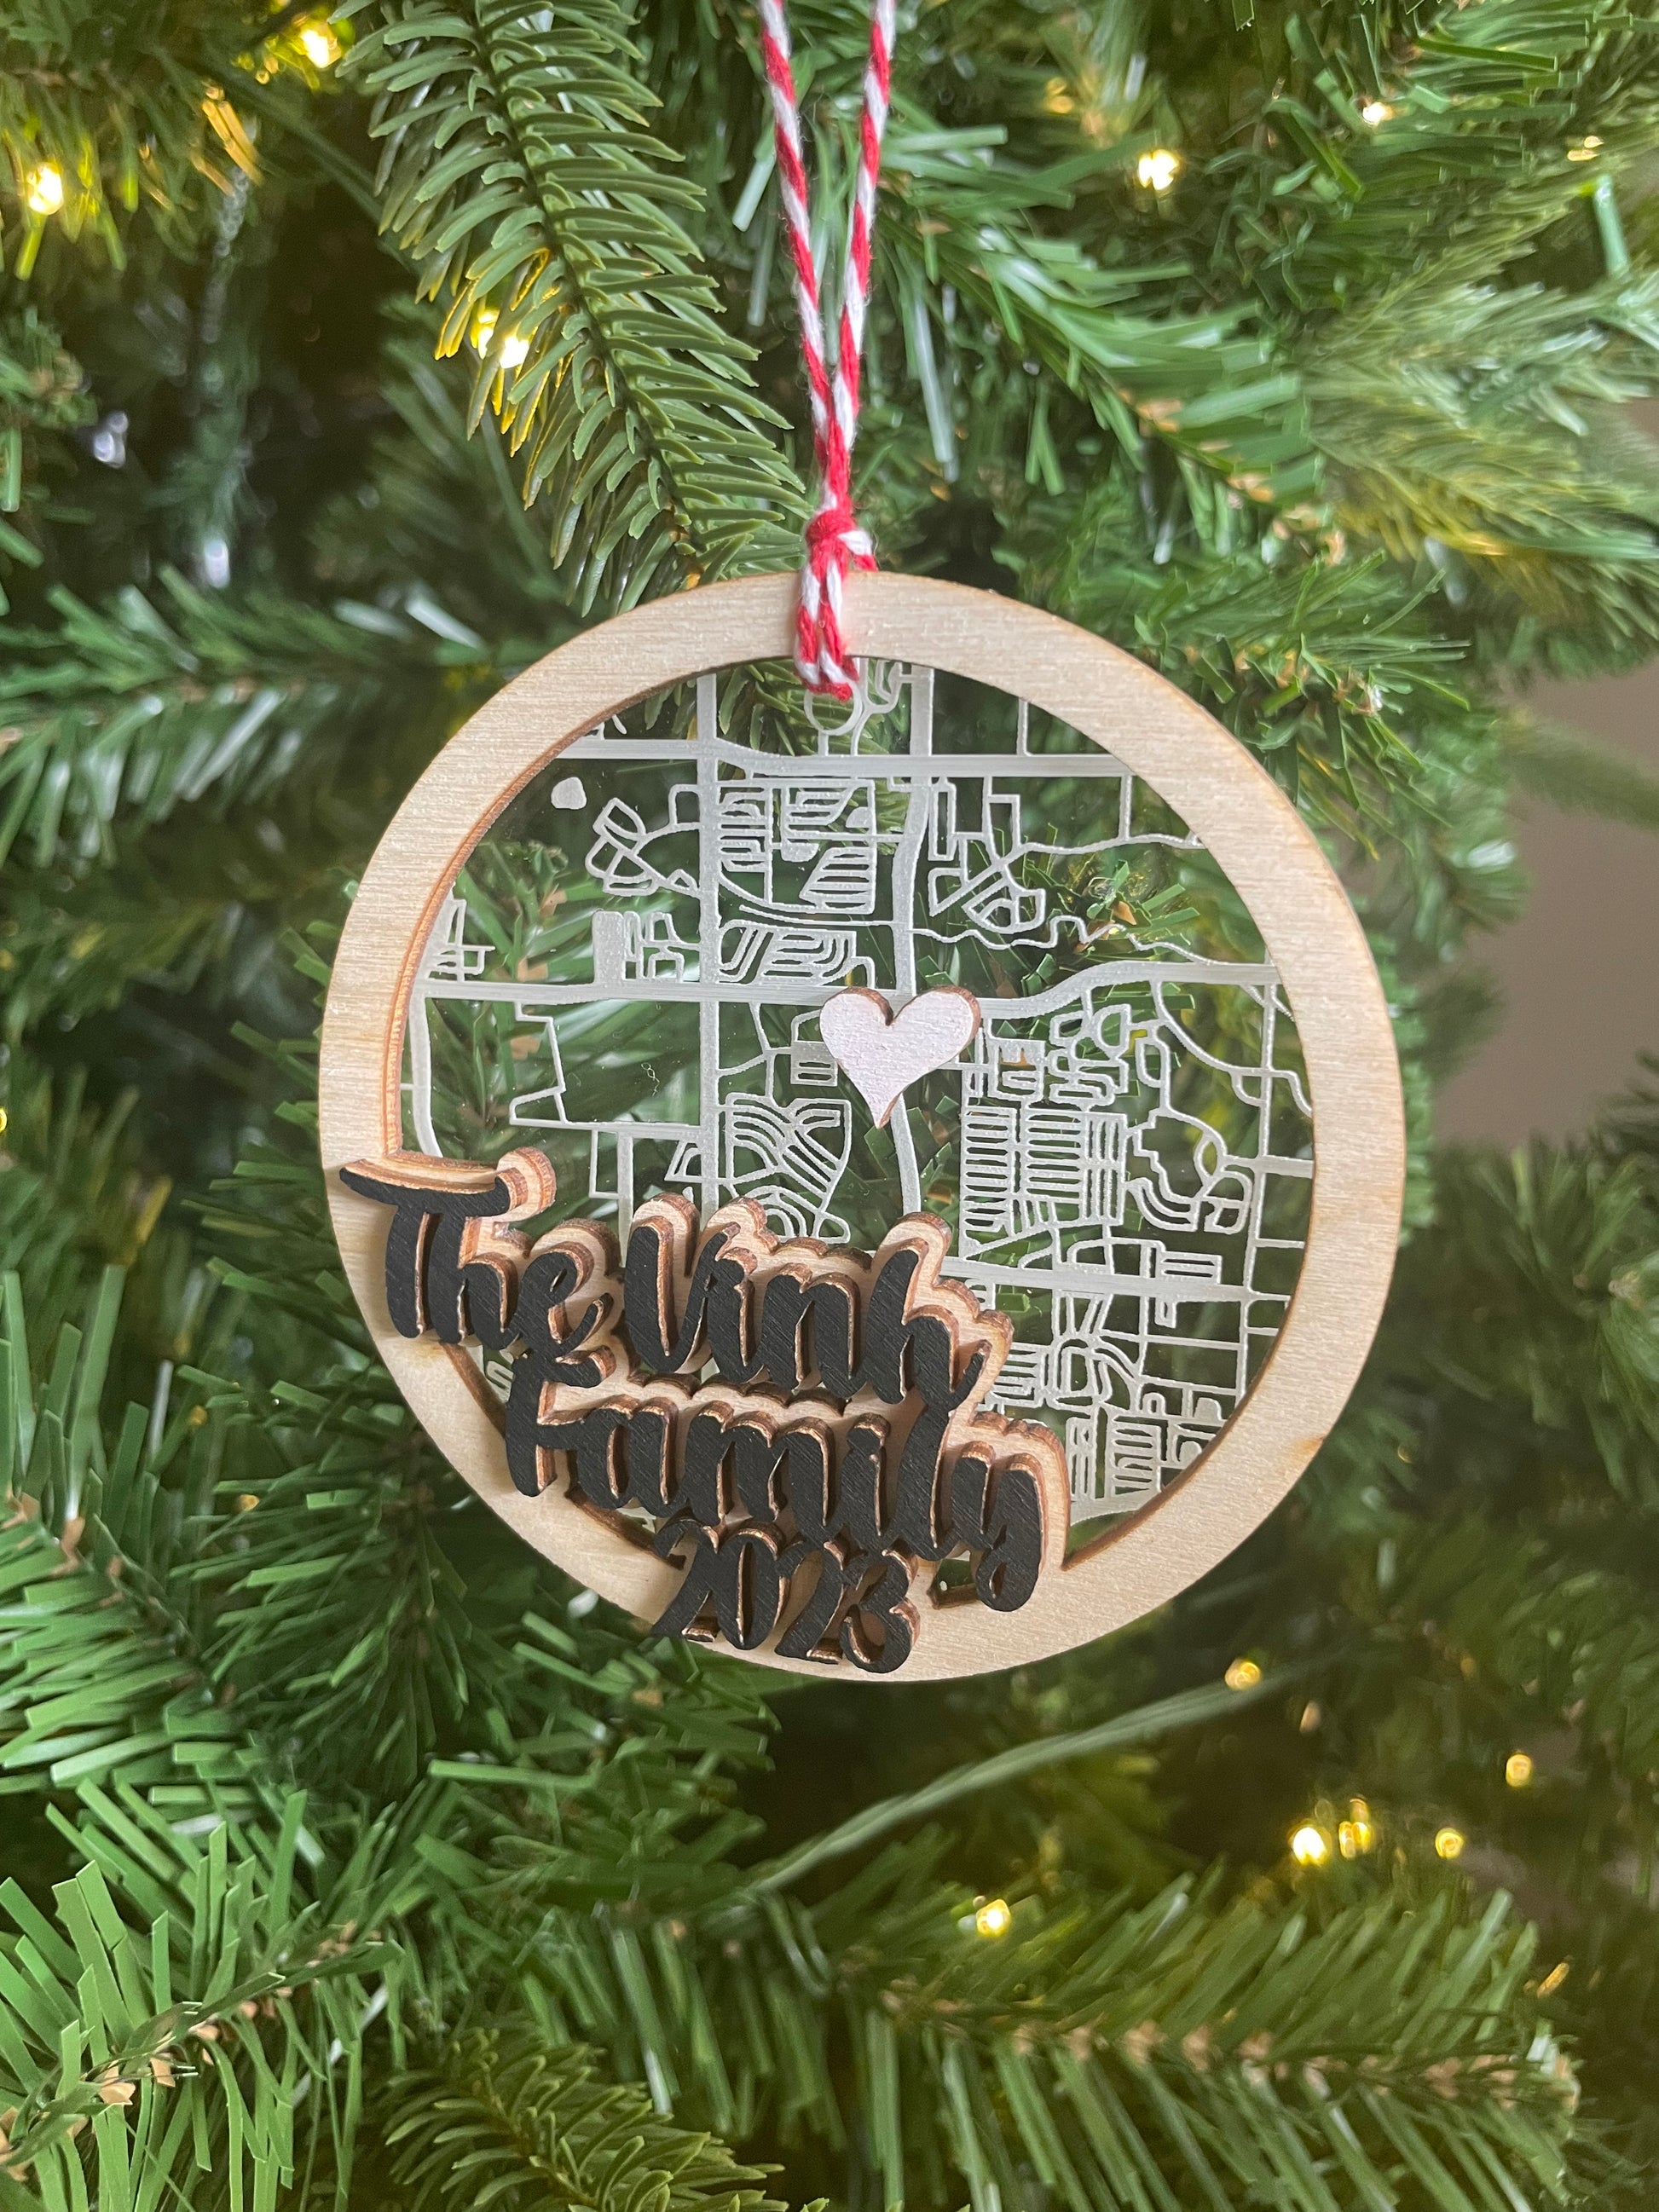 acrylic and wood map ornament on green Christmas tree